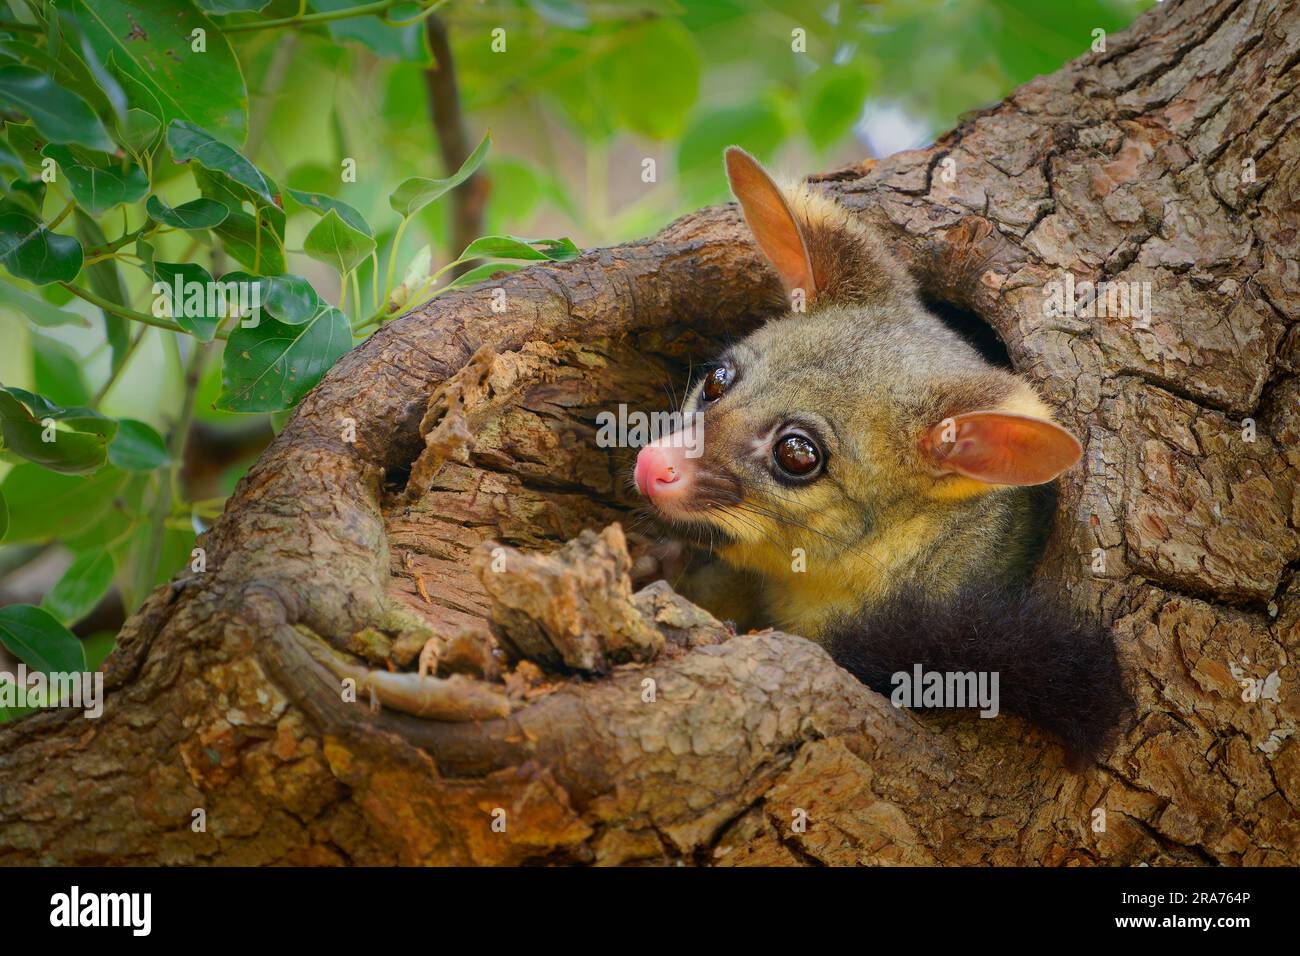 Common Brush-tailed Possum - Trichosurus vulpecula -nocturnal, semi-arboreal marsupial of Australia, introduced to New Zealand. Cute mammal on the tre Stock Photo